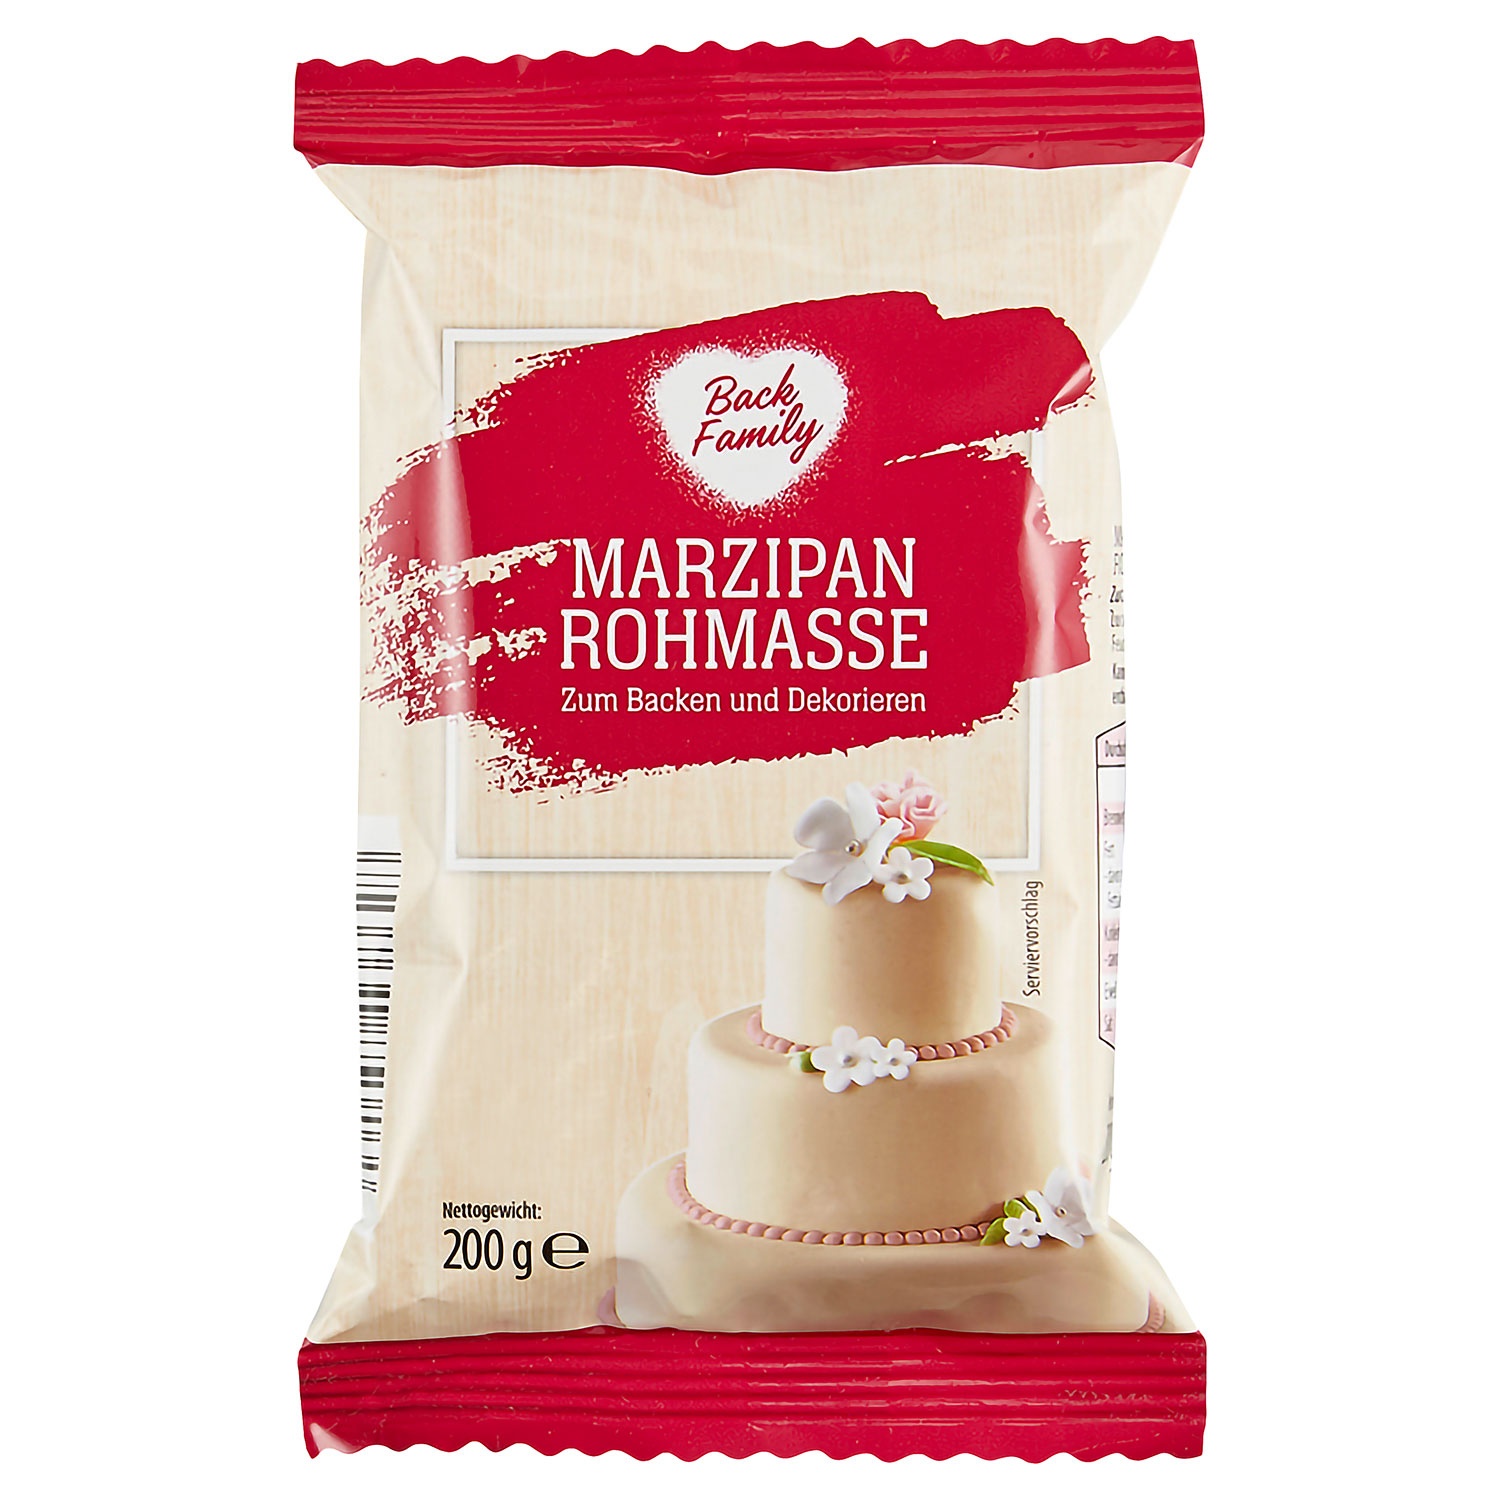 BACK FAMILY Marzipan Rohmasse 200 g